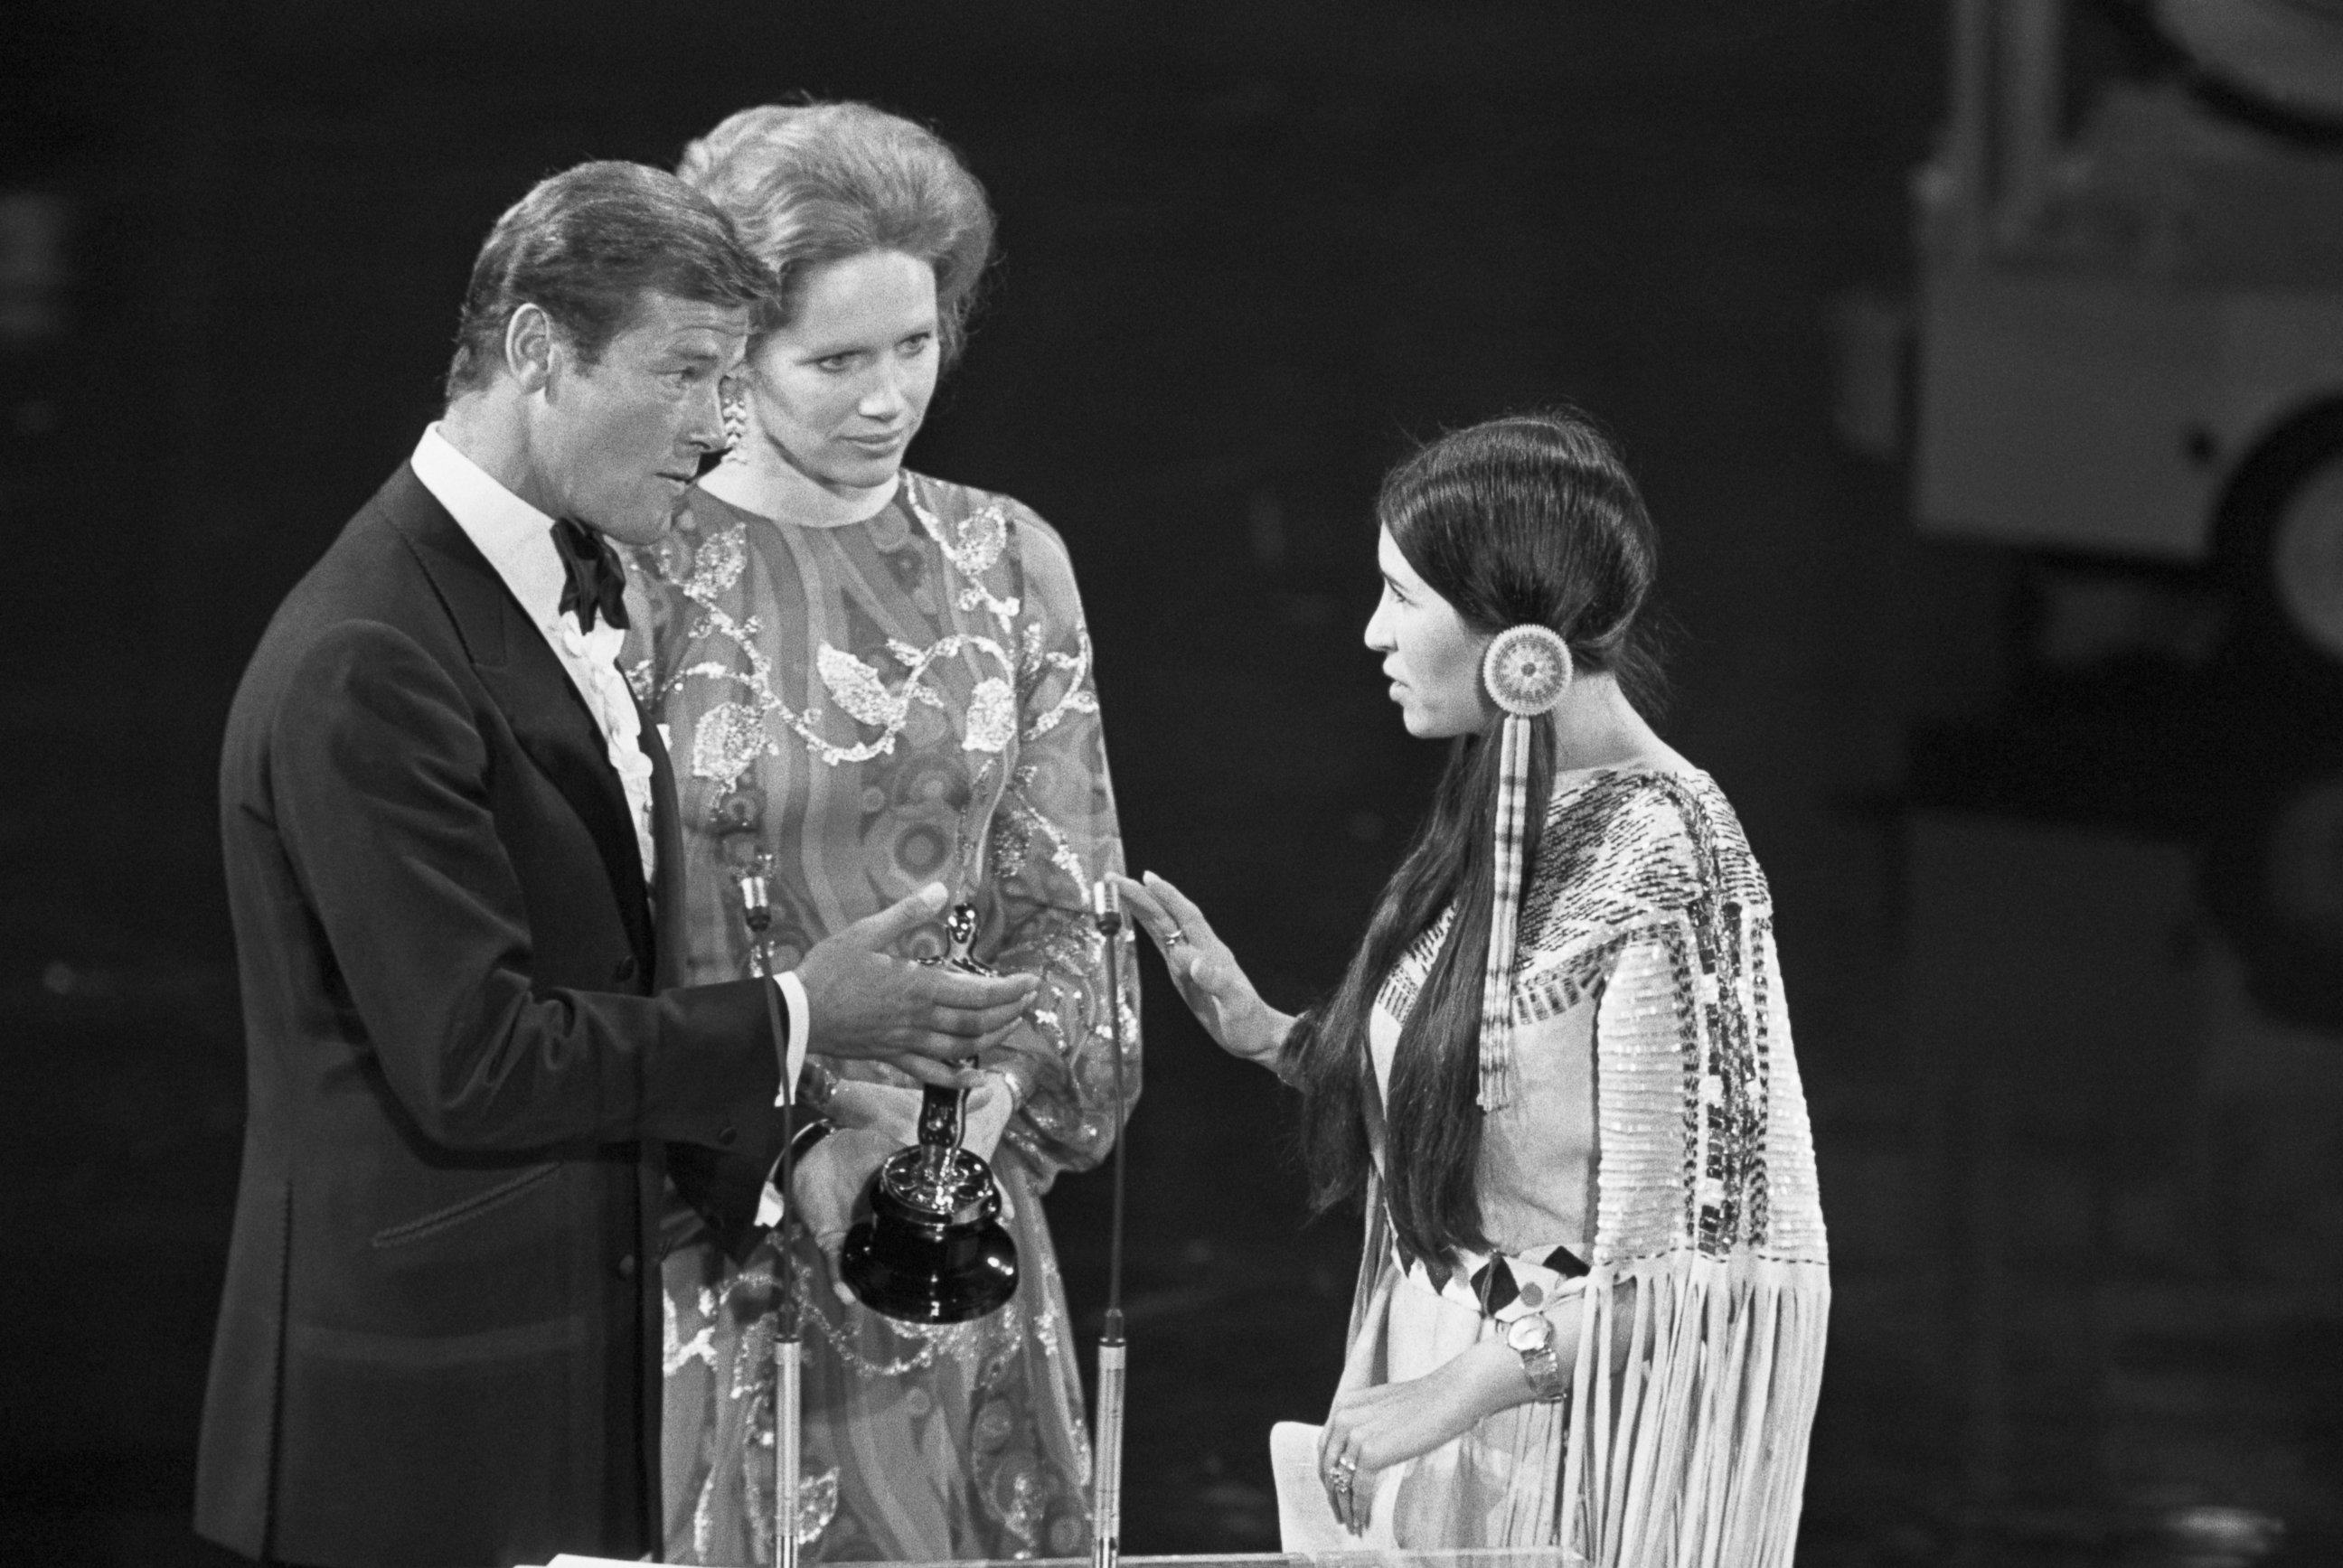 PHOTO: At the 1973 Academy Awards ceremony, Sacheen Littlefeather refuses the award for Best Actor on behalf of Marlon Brando who won for his role in "The Godfather."